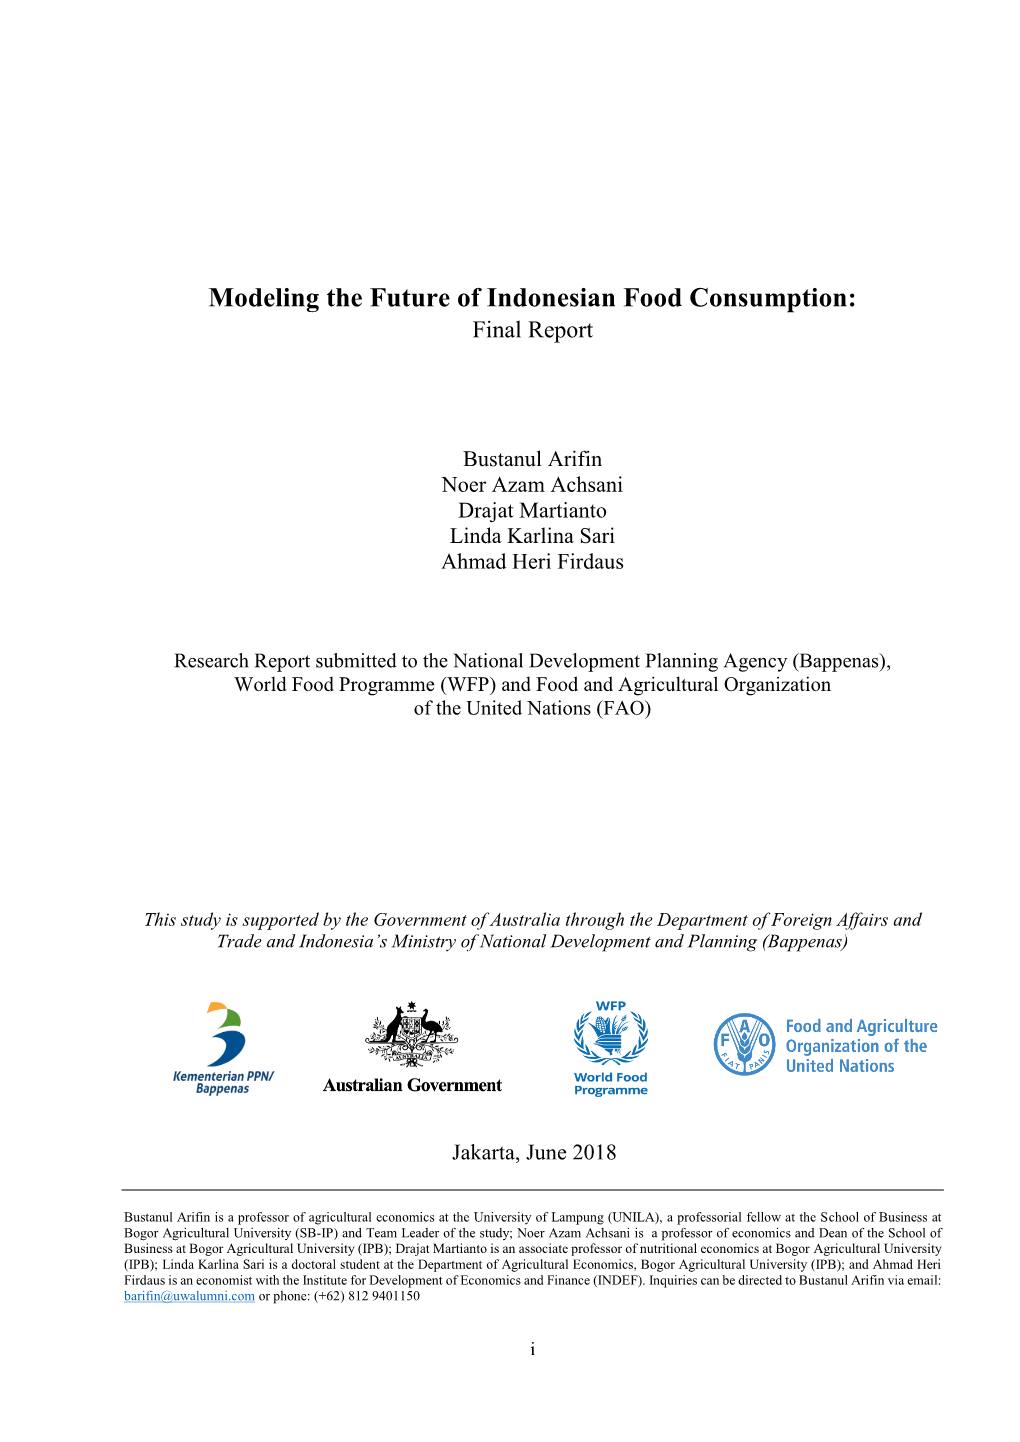 Modeling the Future of Indonesian Food Consumption: Final Report